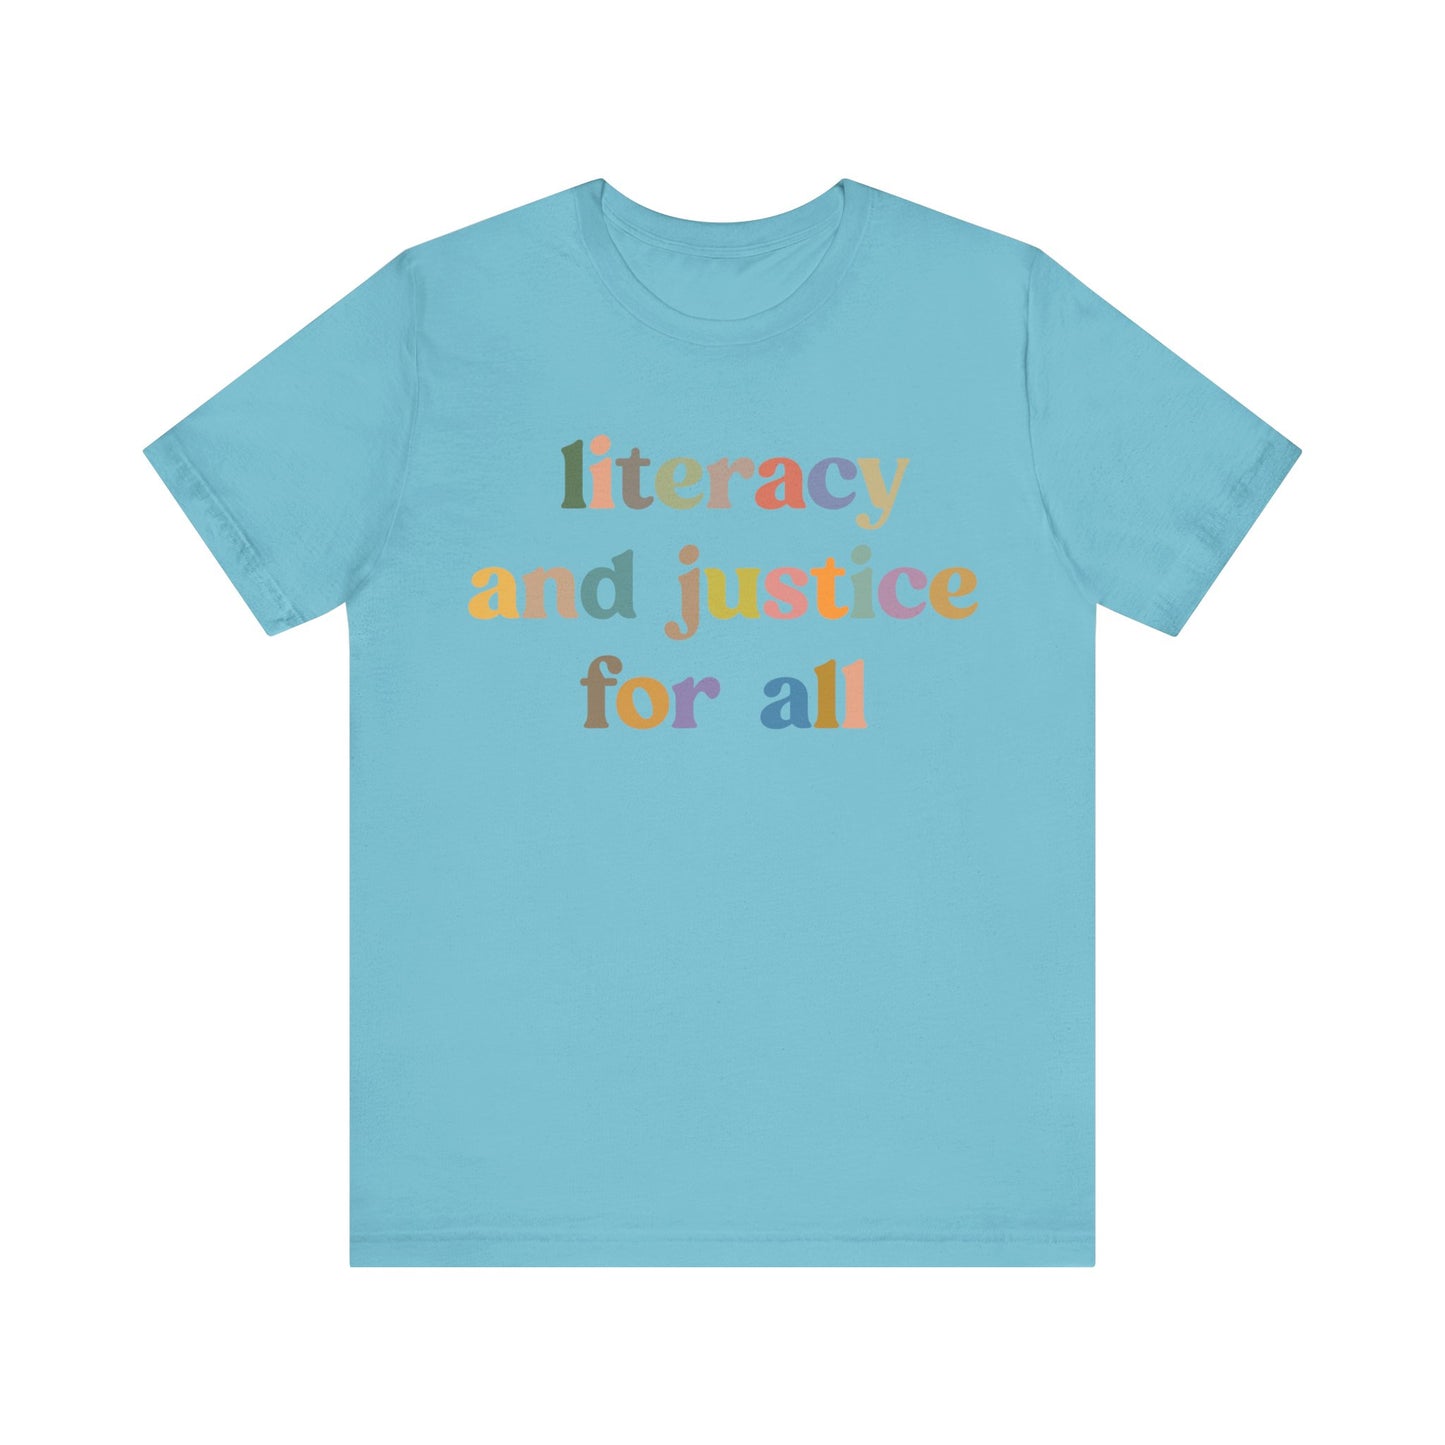 Literacy And Justice For All Shirt, Literacy Teacher Shirt, English Teacher Shirt, Literacy Teacher Shirt, English Coach, T1104